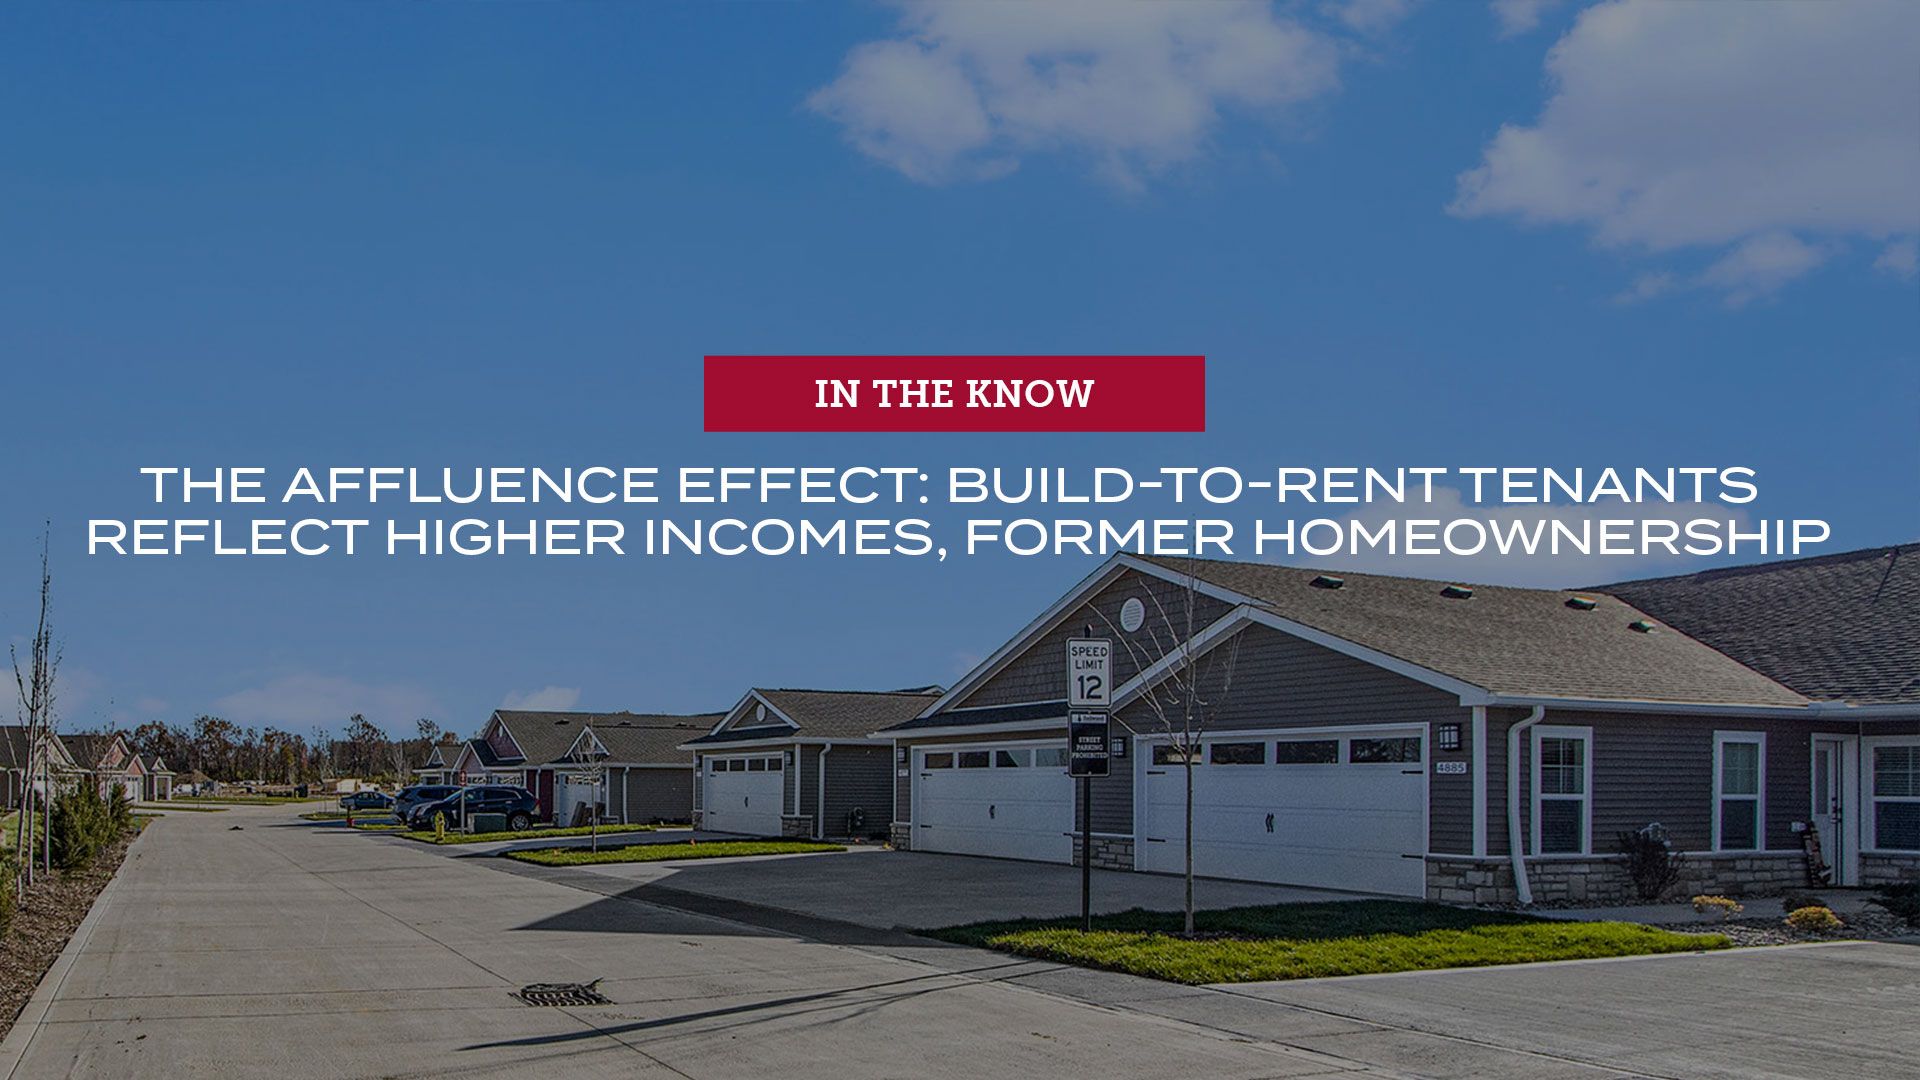 The affluence effect: Build-to-rent tenants reflect higher incomes, former homeownership